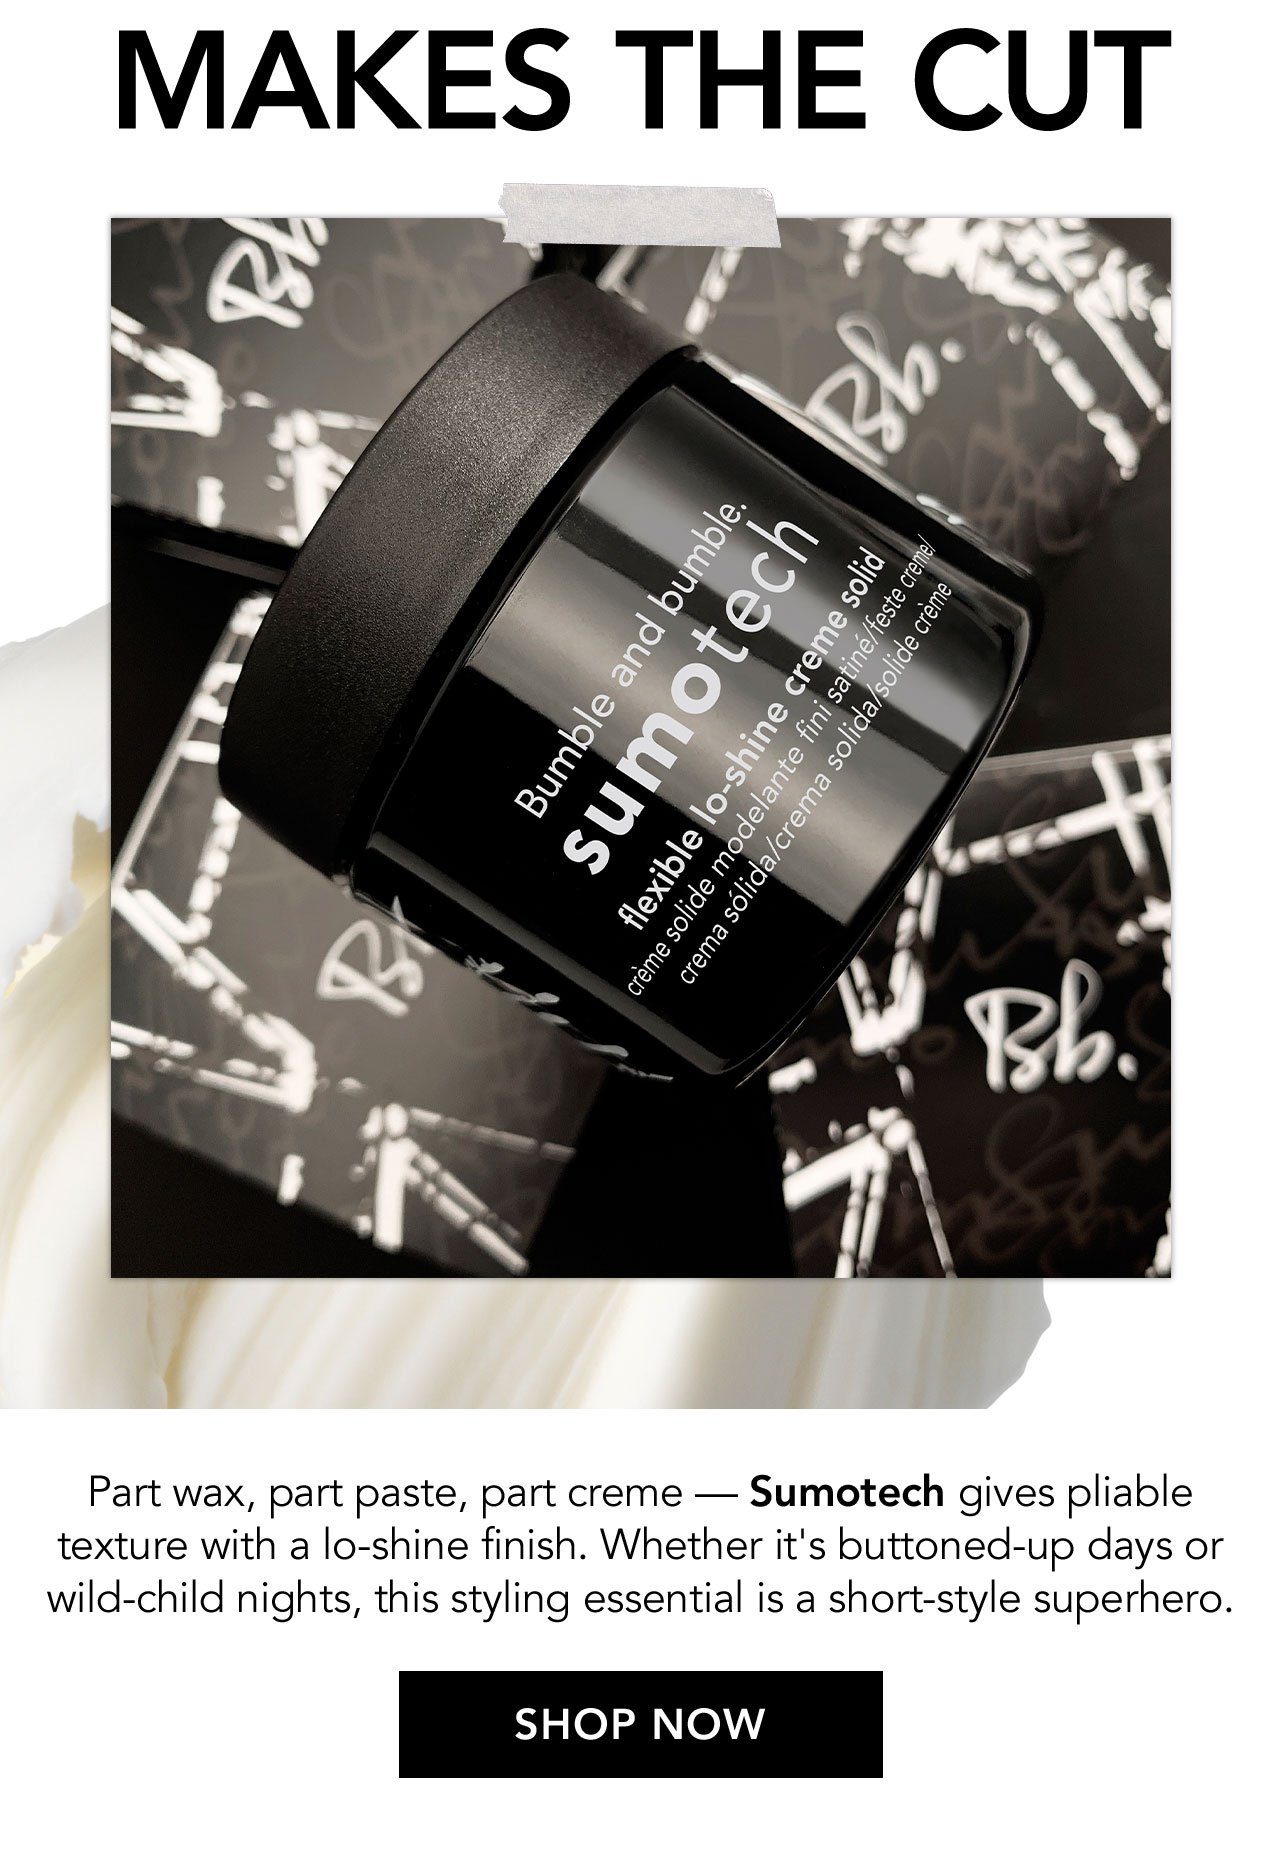 MAKES THE CUT | Part wax, part paste, part creme - sumotech gives pliable texture with a lo-shine finish. Whether it's buttoned-up days or wild-child nights, this styling essential is a short-style superhero | SHOP NOW